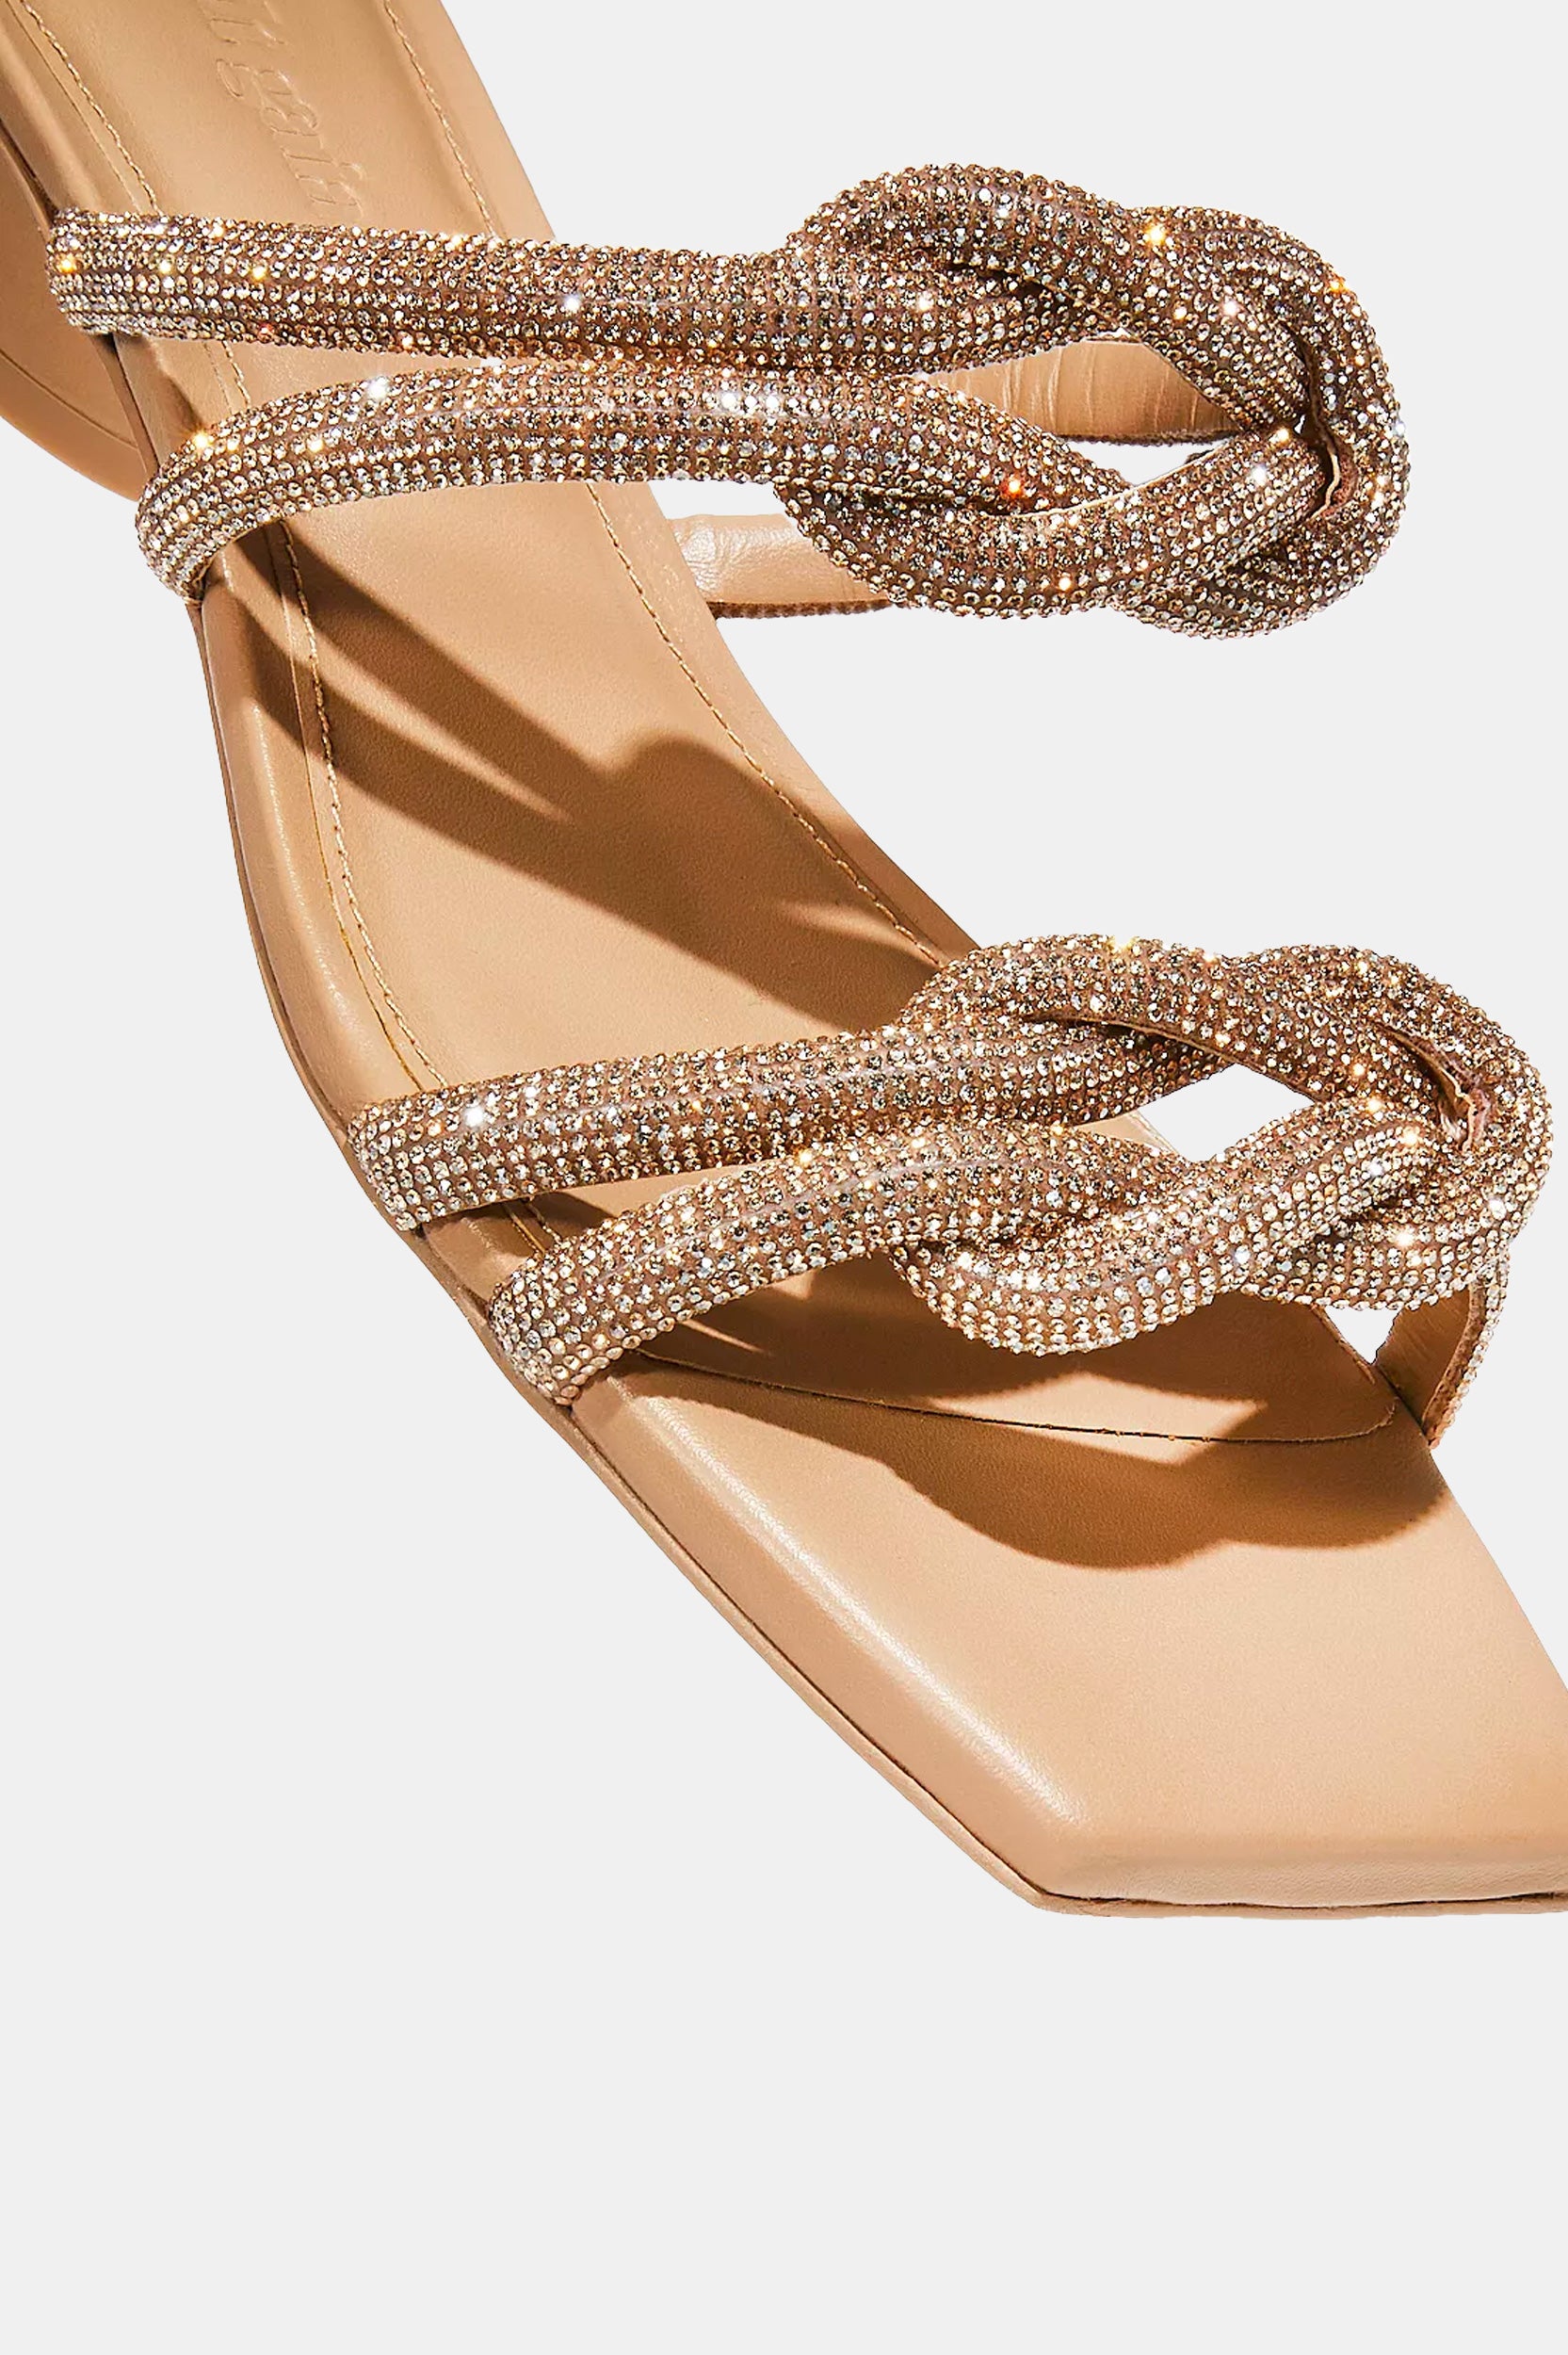 Jenny Knotted Sandal in Sand